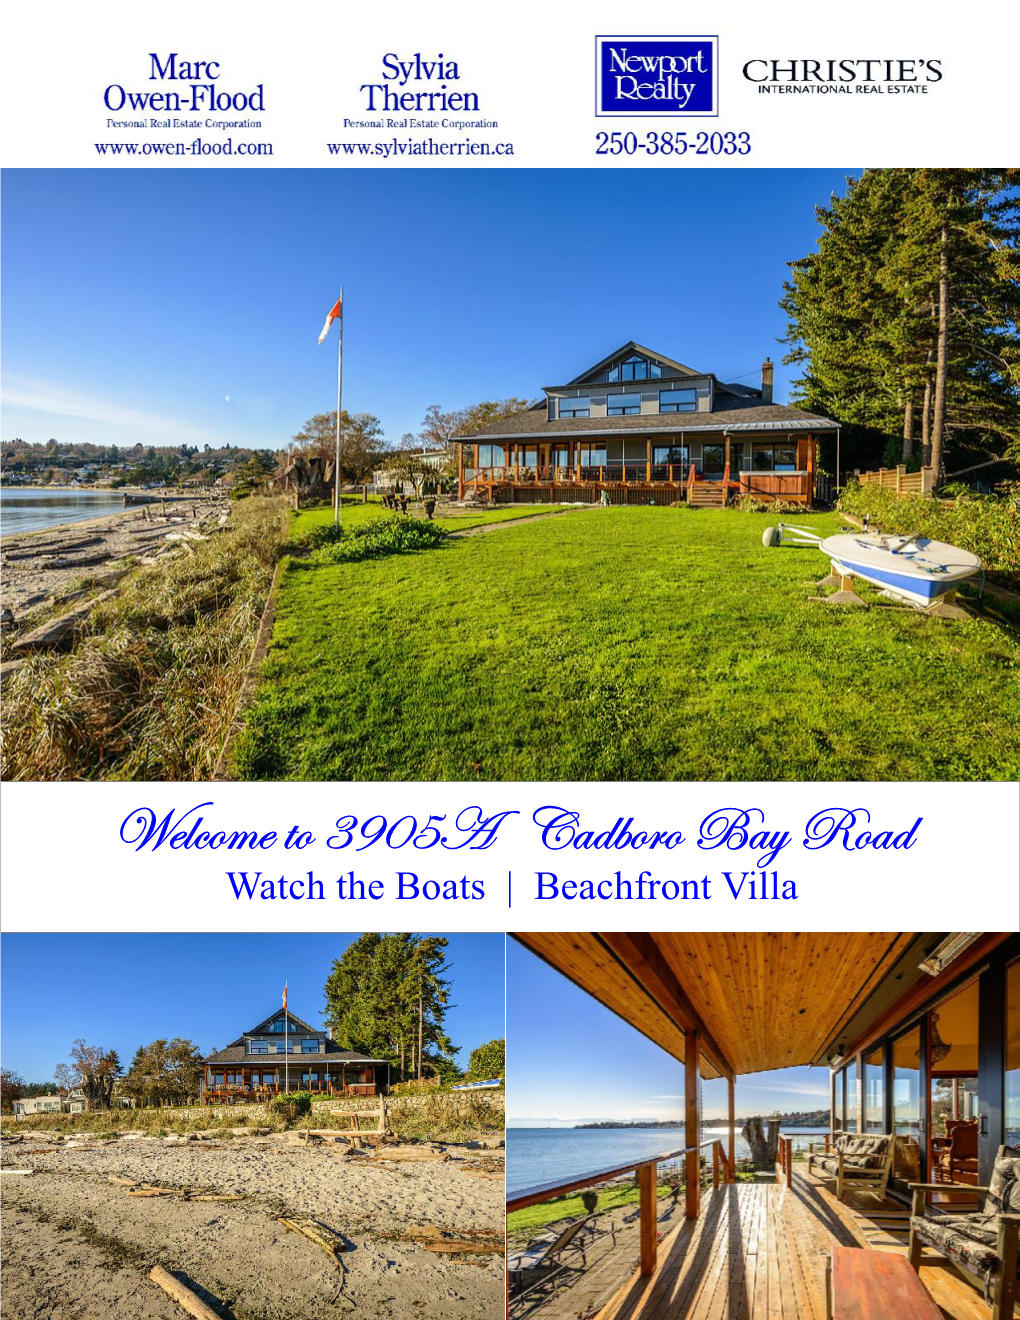 Welcome to 3905A Cadboro Bay Road Watch the Boats | Beachfront Villa EXCLUSIVE BEACHFRONT Living at Its Best